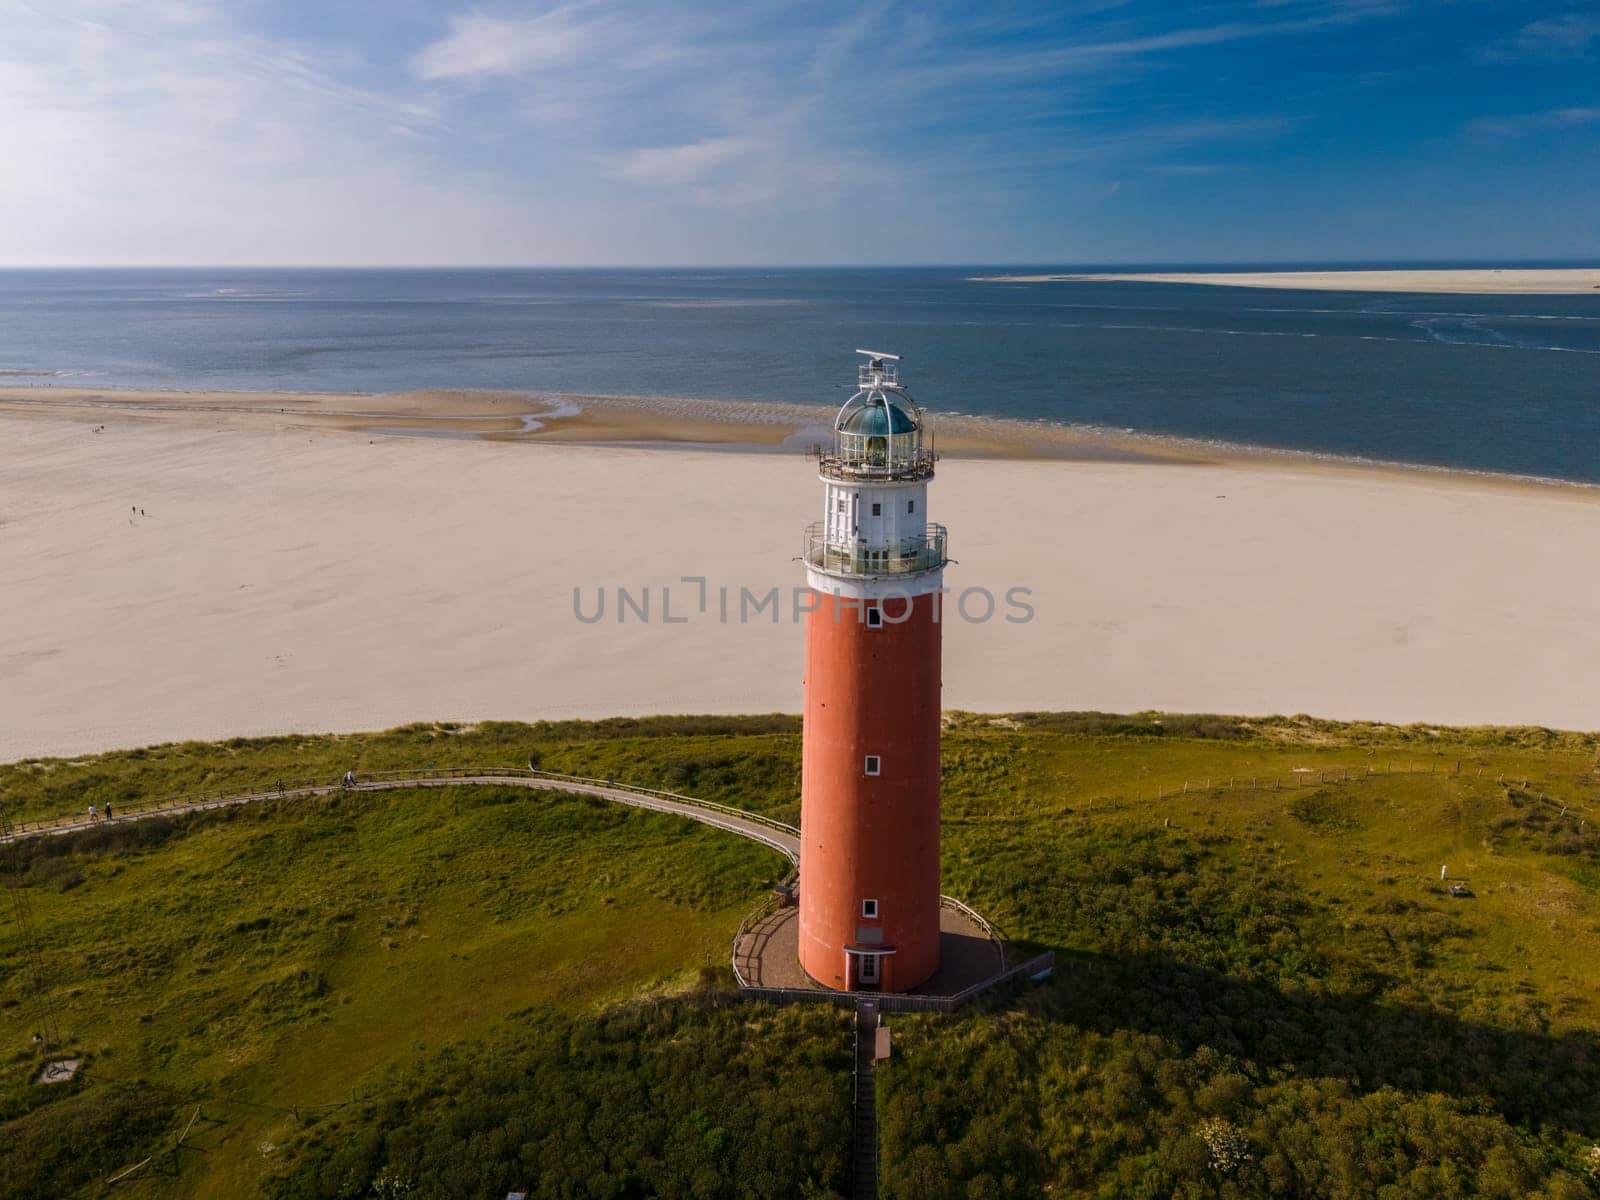 Aerial perspective of a majestic lighthouse standing tall on a sandy Texel beach, casting its guiding light over the vast expanse of the coastline.